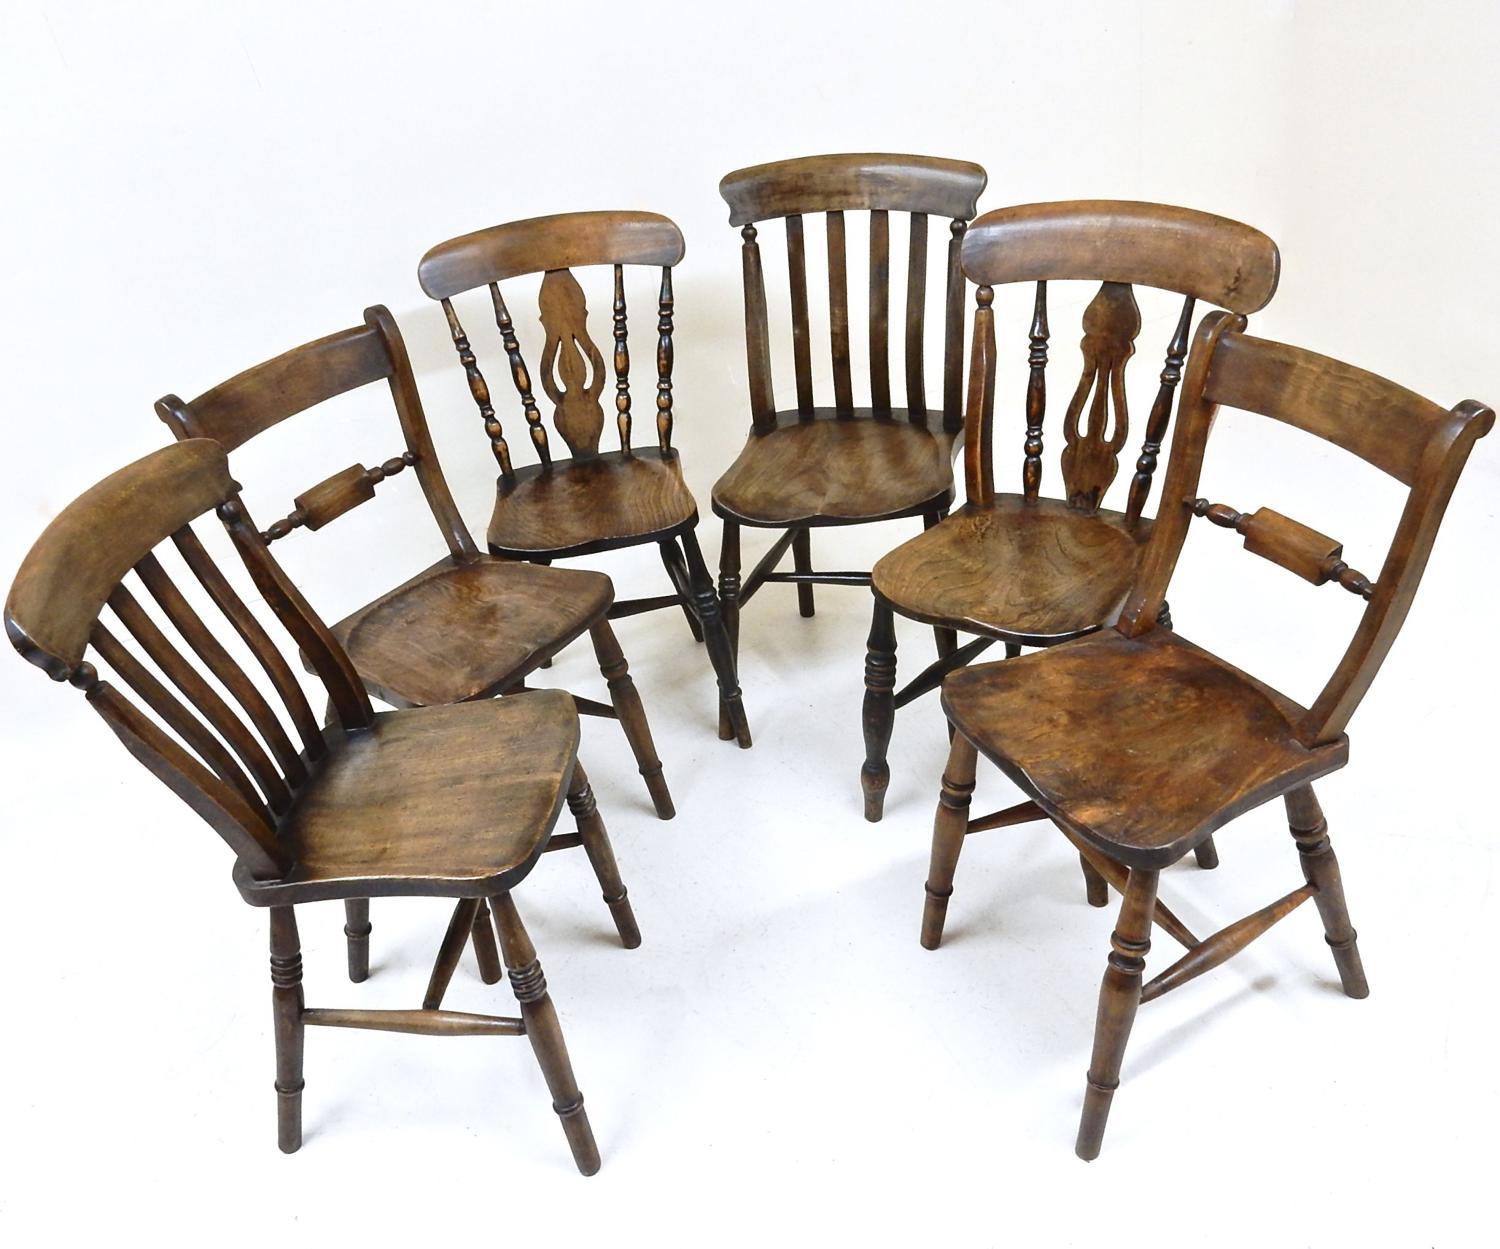 Assorted Antique Kitchen Chairs